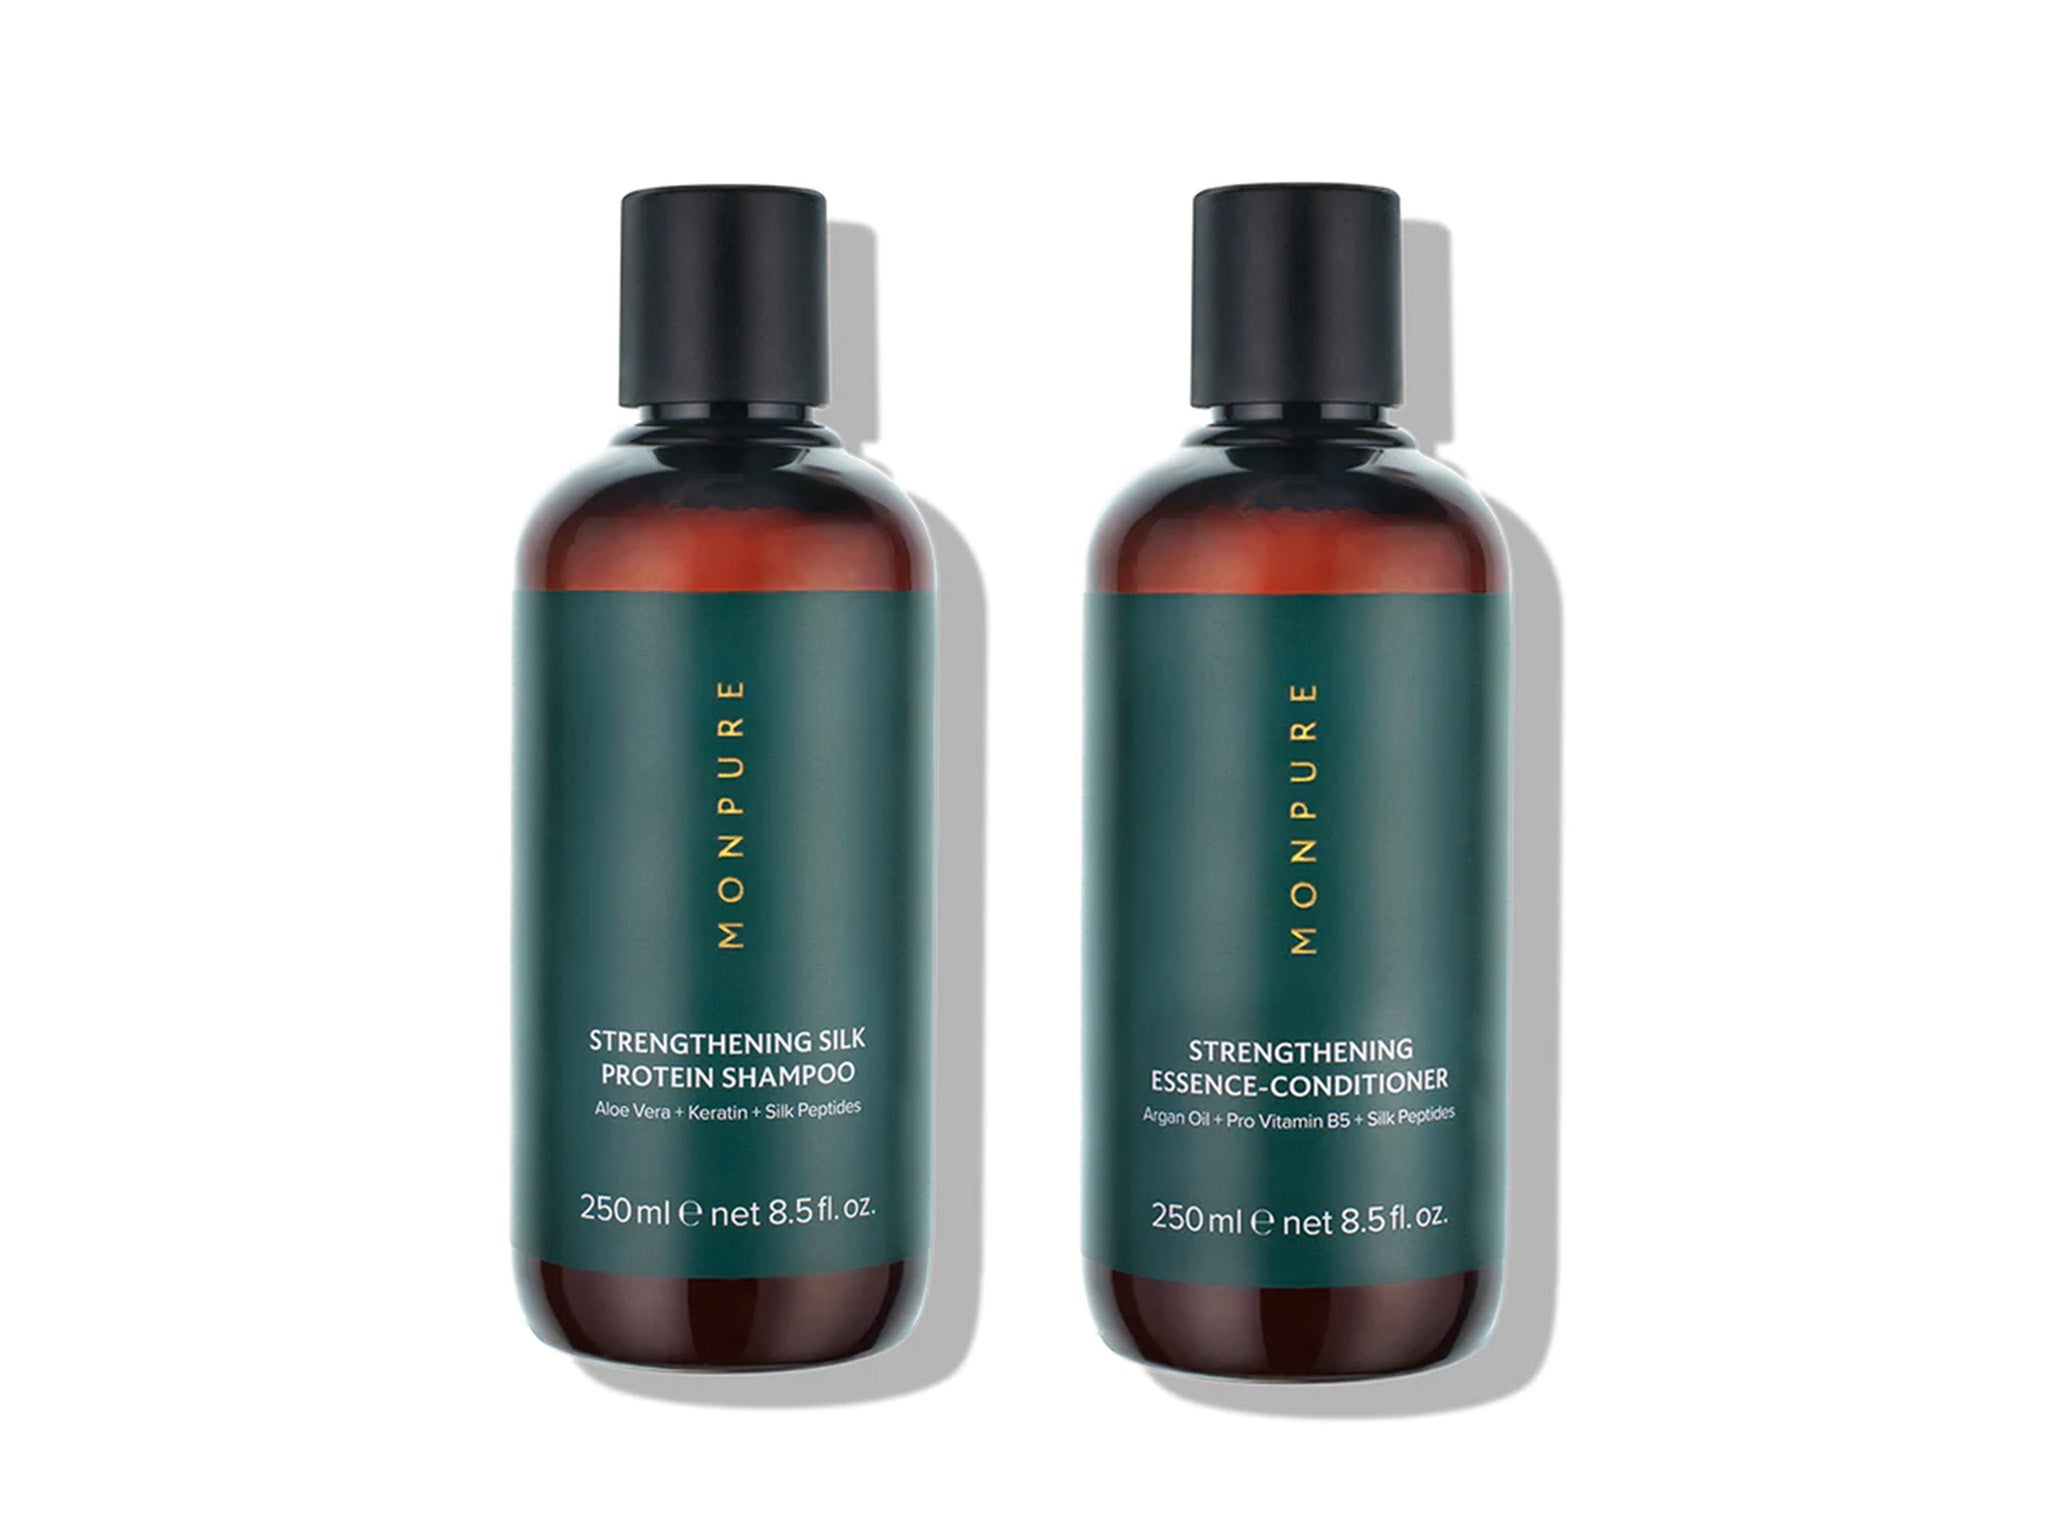 MonPure strengthening silk protein shampoo and conditioner 